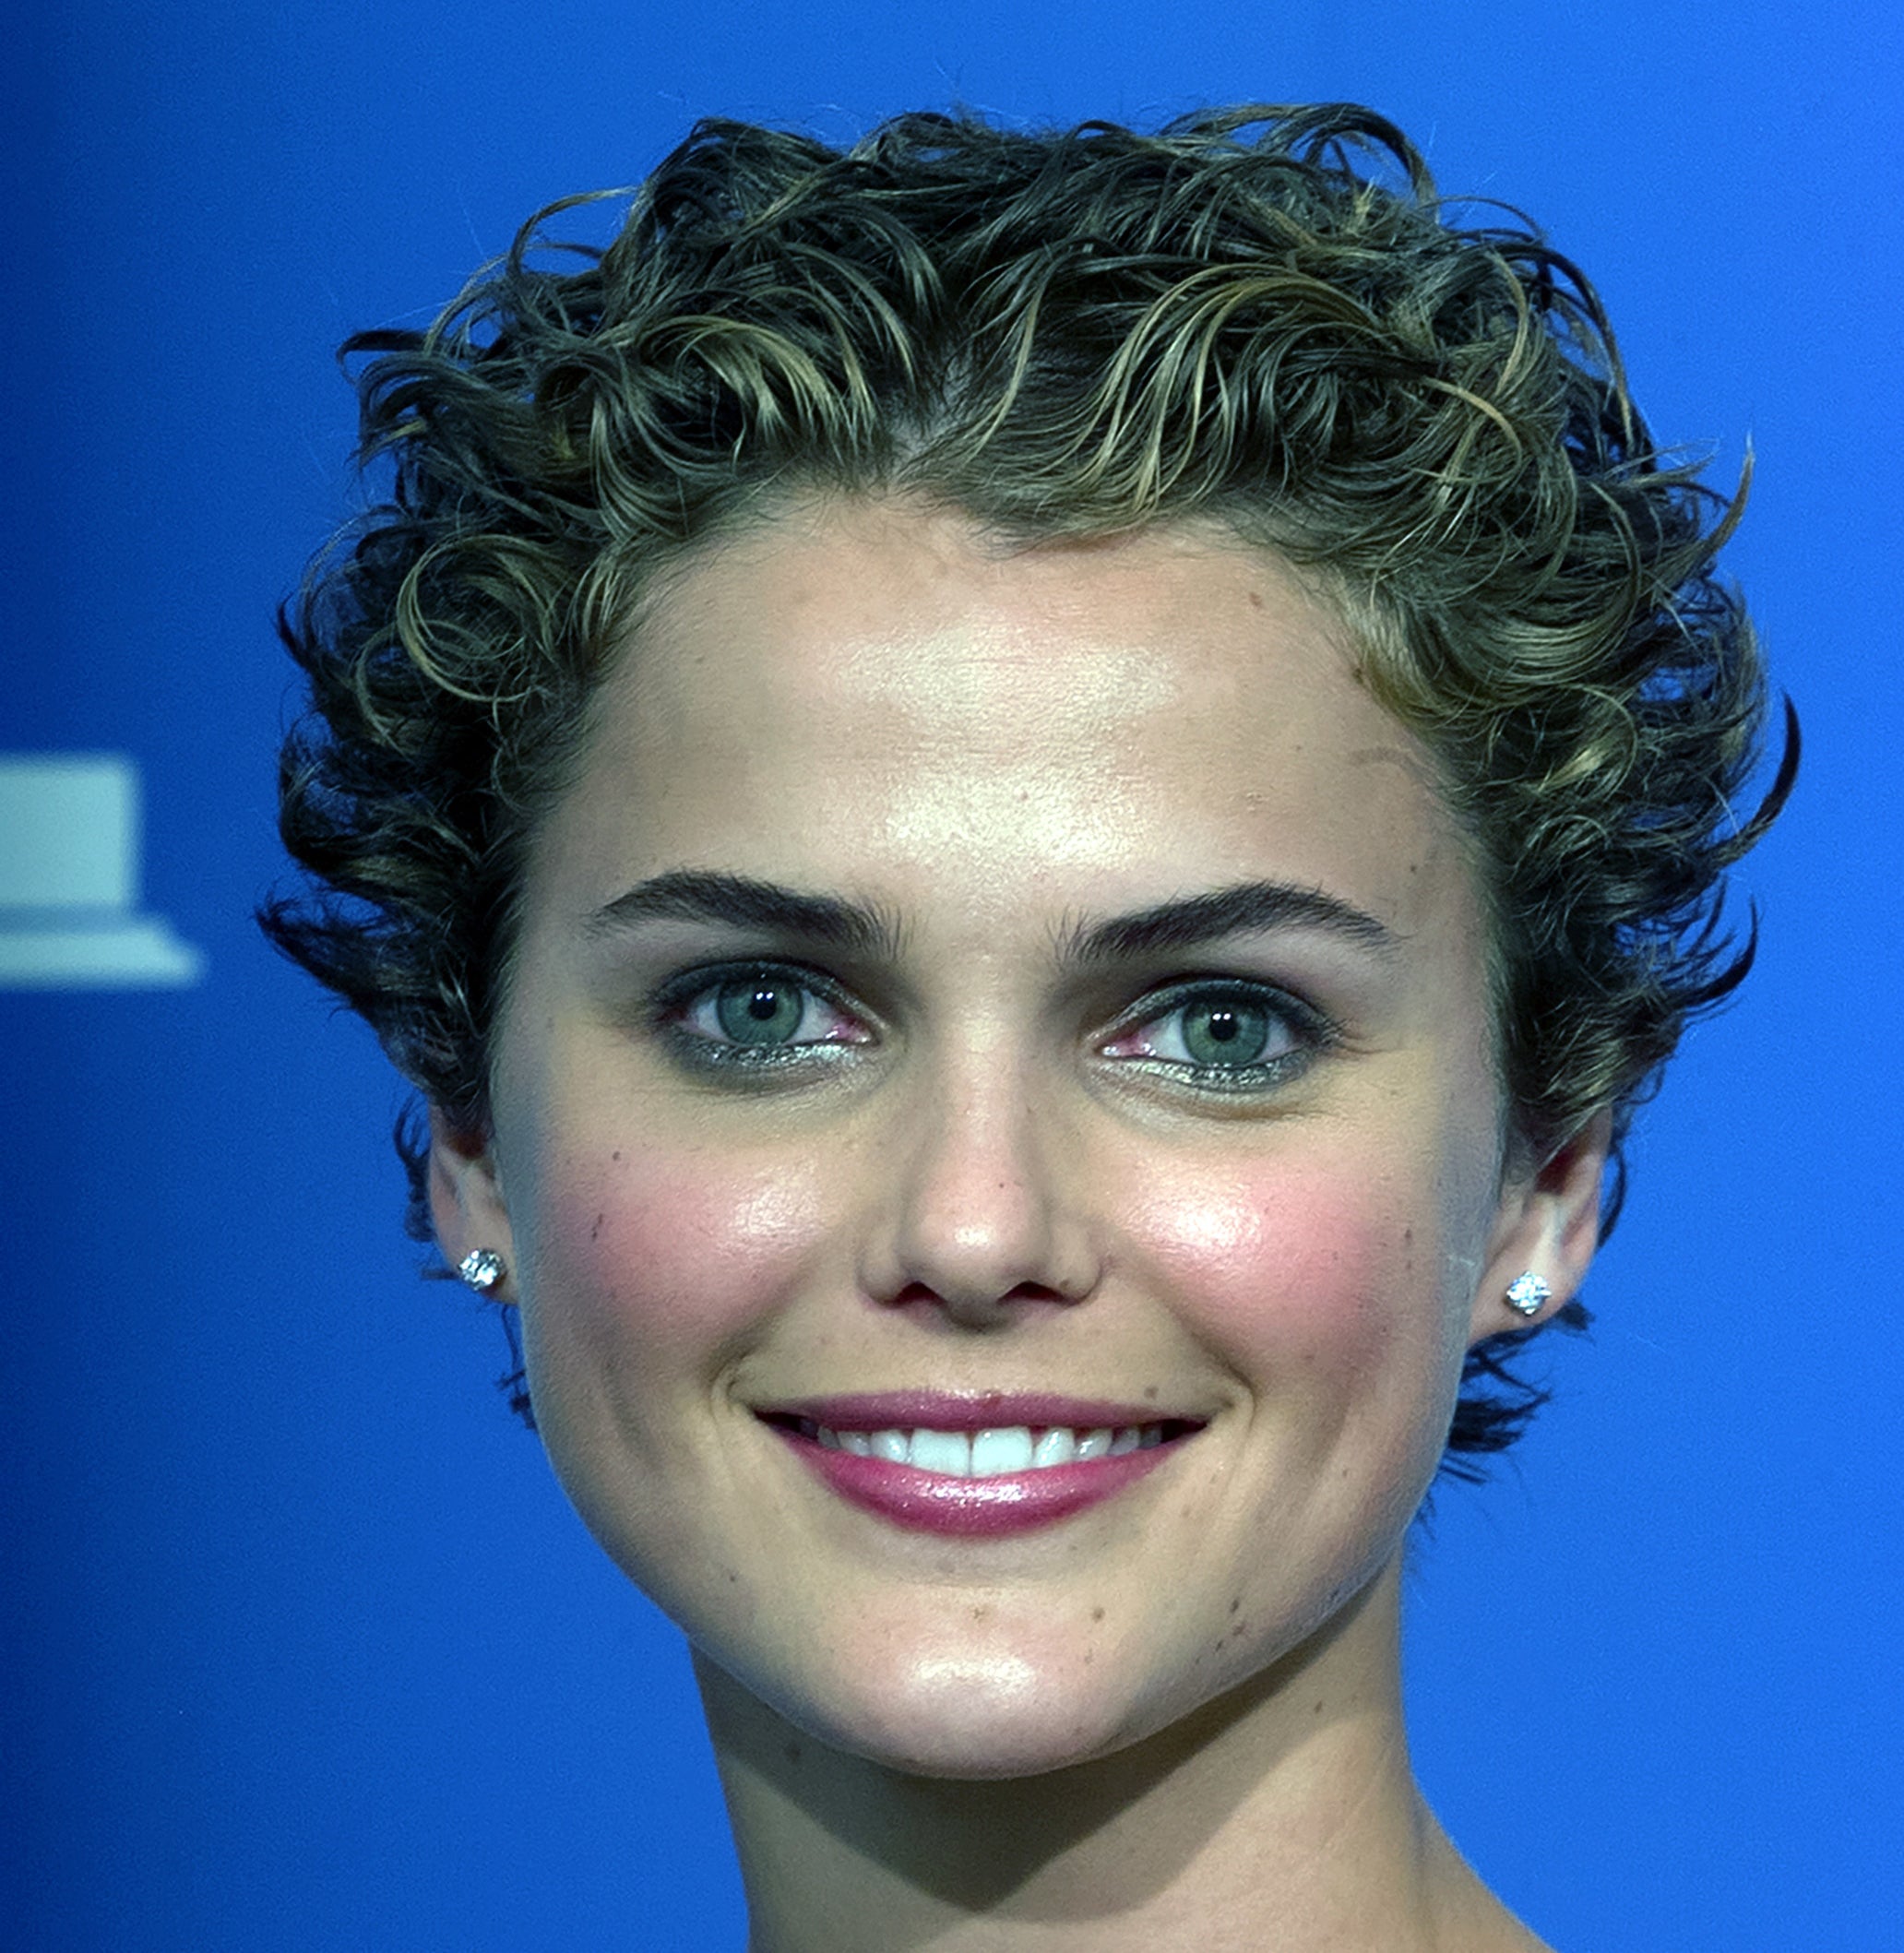 Keri Russell at a press event with short hair